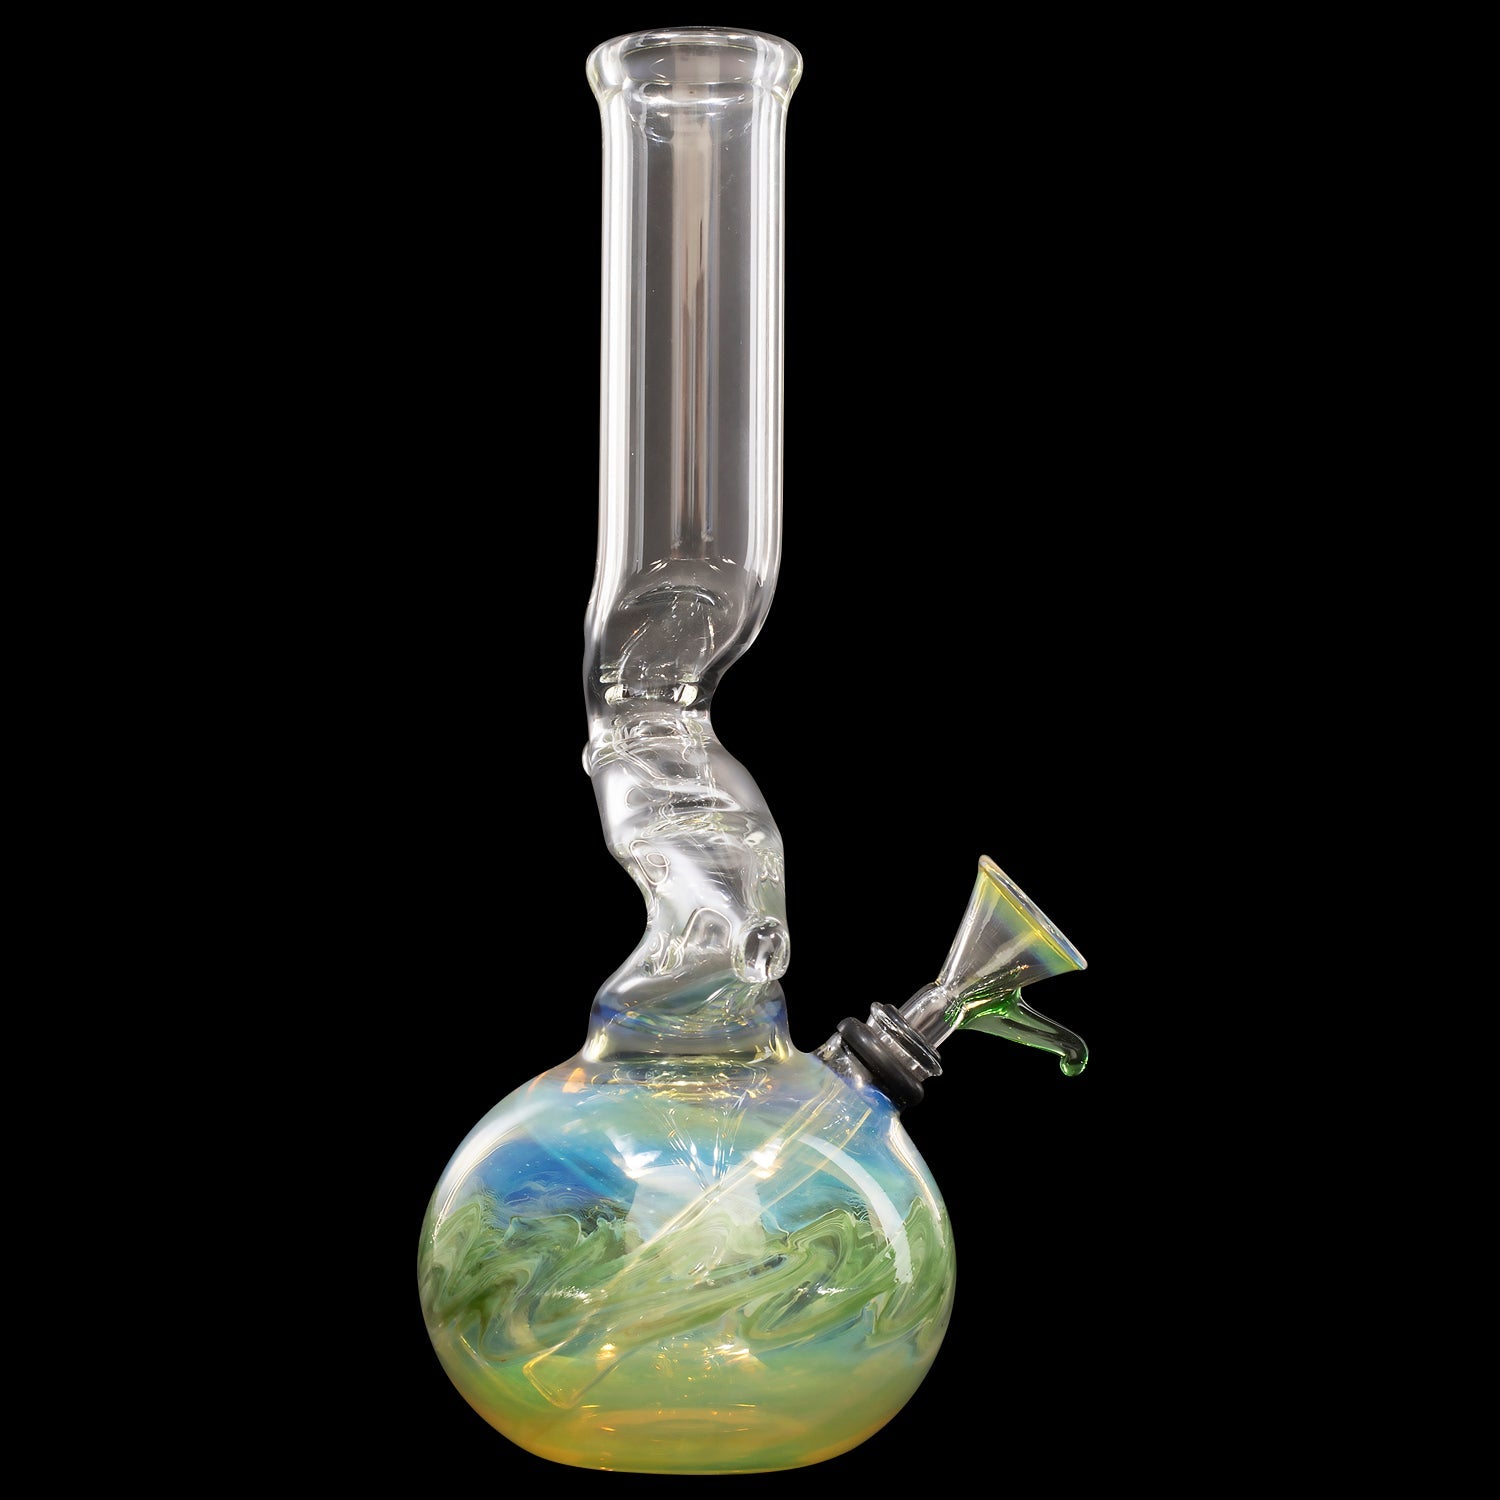 LA Pipes "Zong-Bubble-Bong" Classic Water-Pipe (ONLINE ONLY)